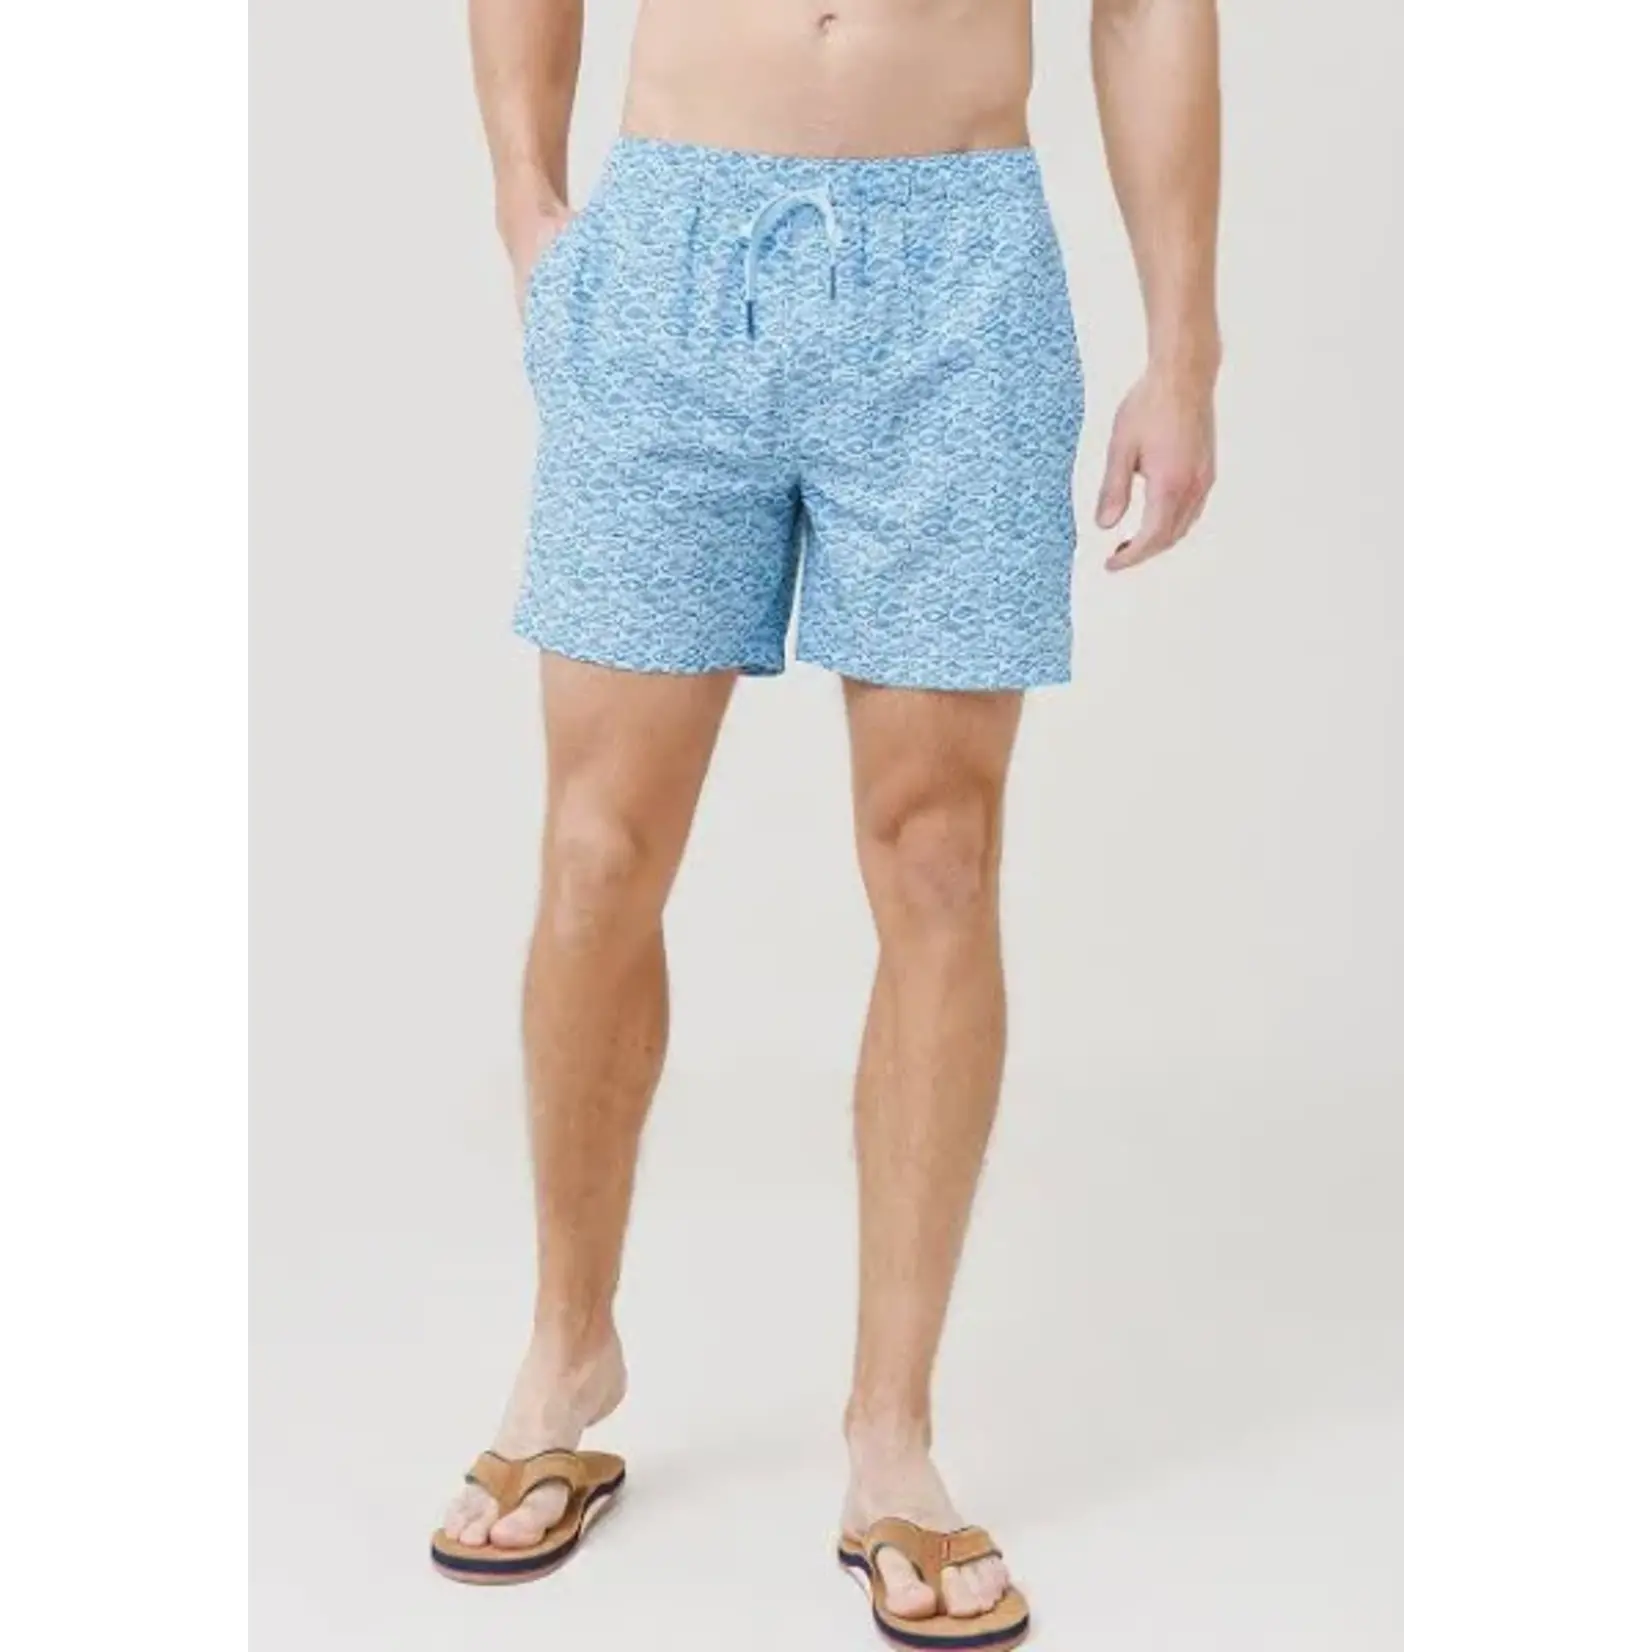 Southern Tide 6 in Swim Party Trunk